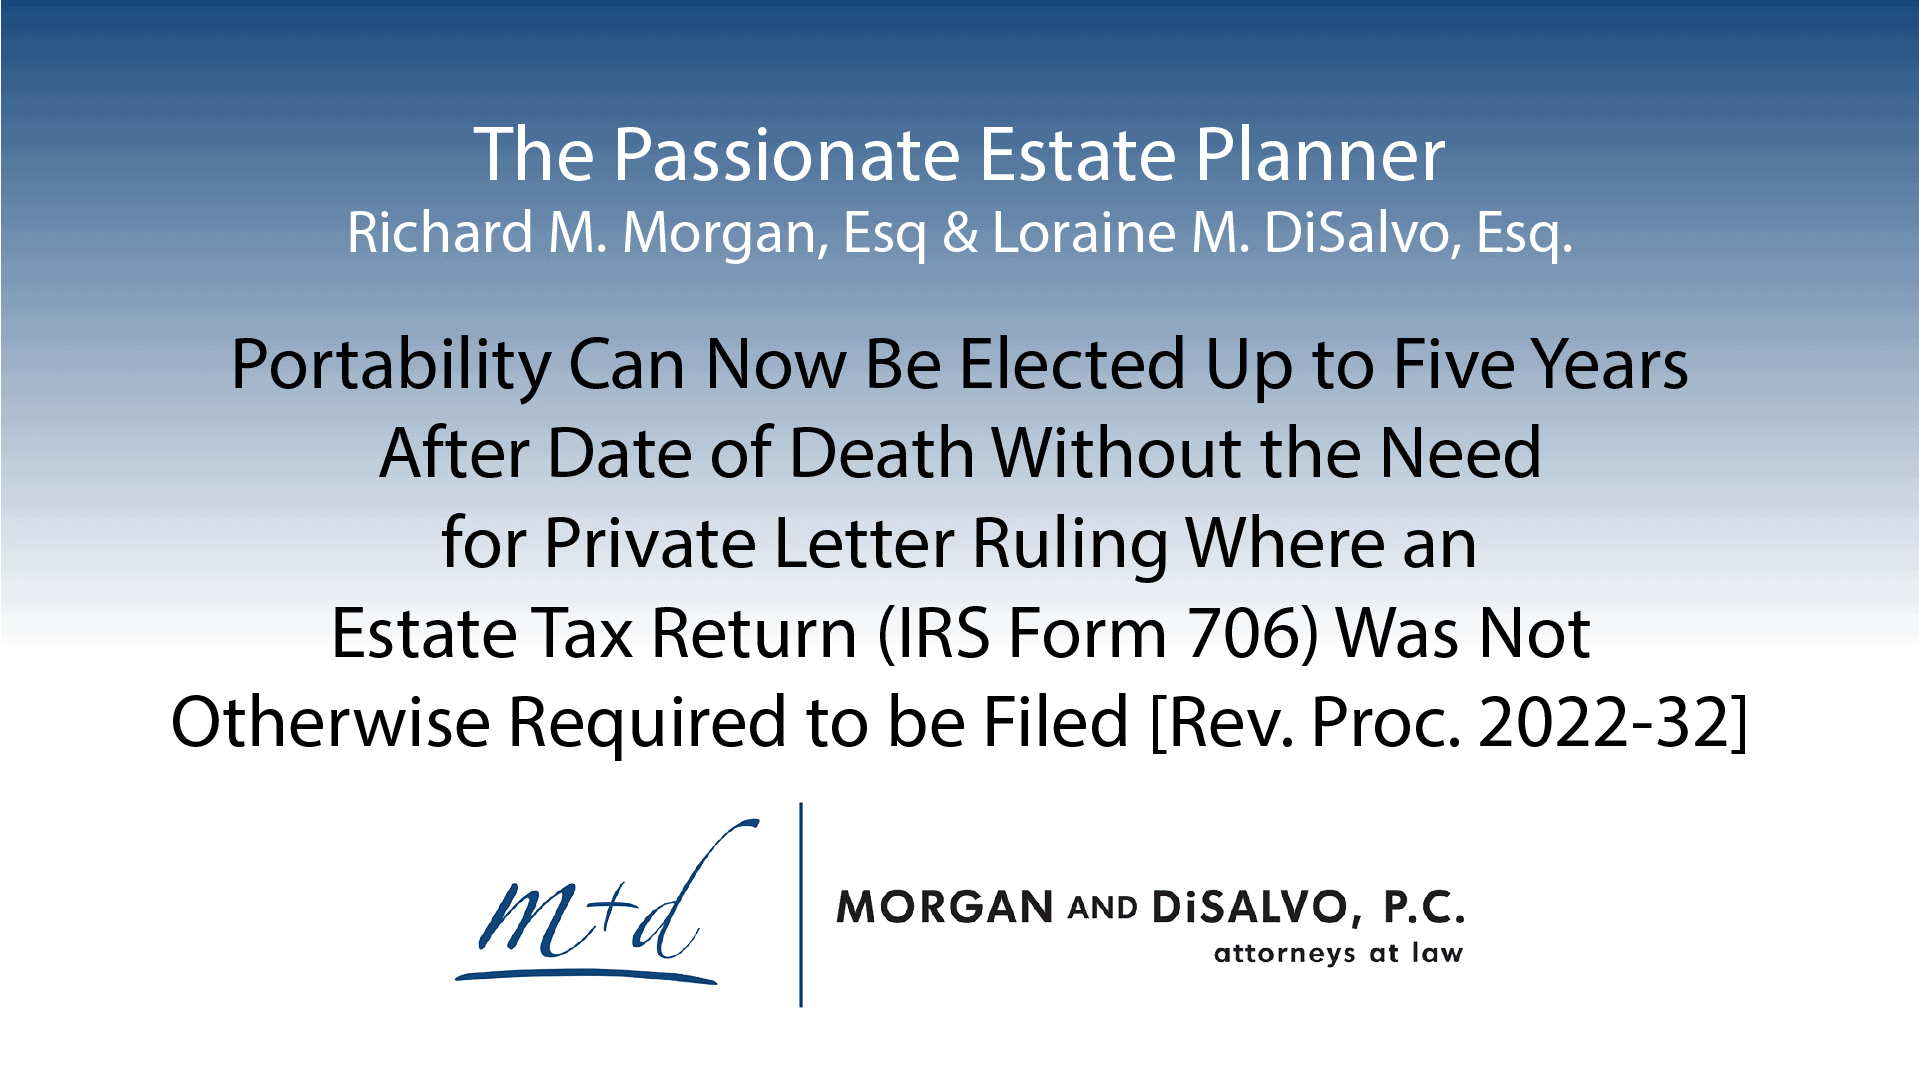 Portability Can Now Be Elected Up to Five Years After Date of Death Without  the Need for Private Letter Ruling Where an Estate Tax Return (IRS Form  706) Was Not Otherwise Required